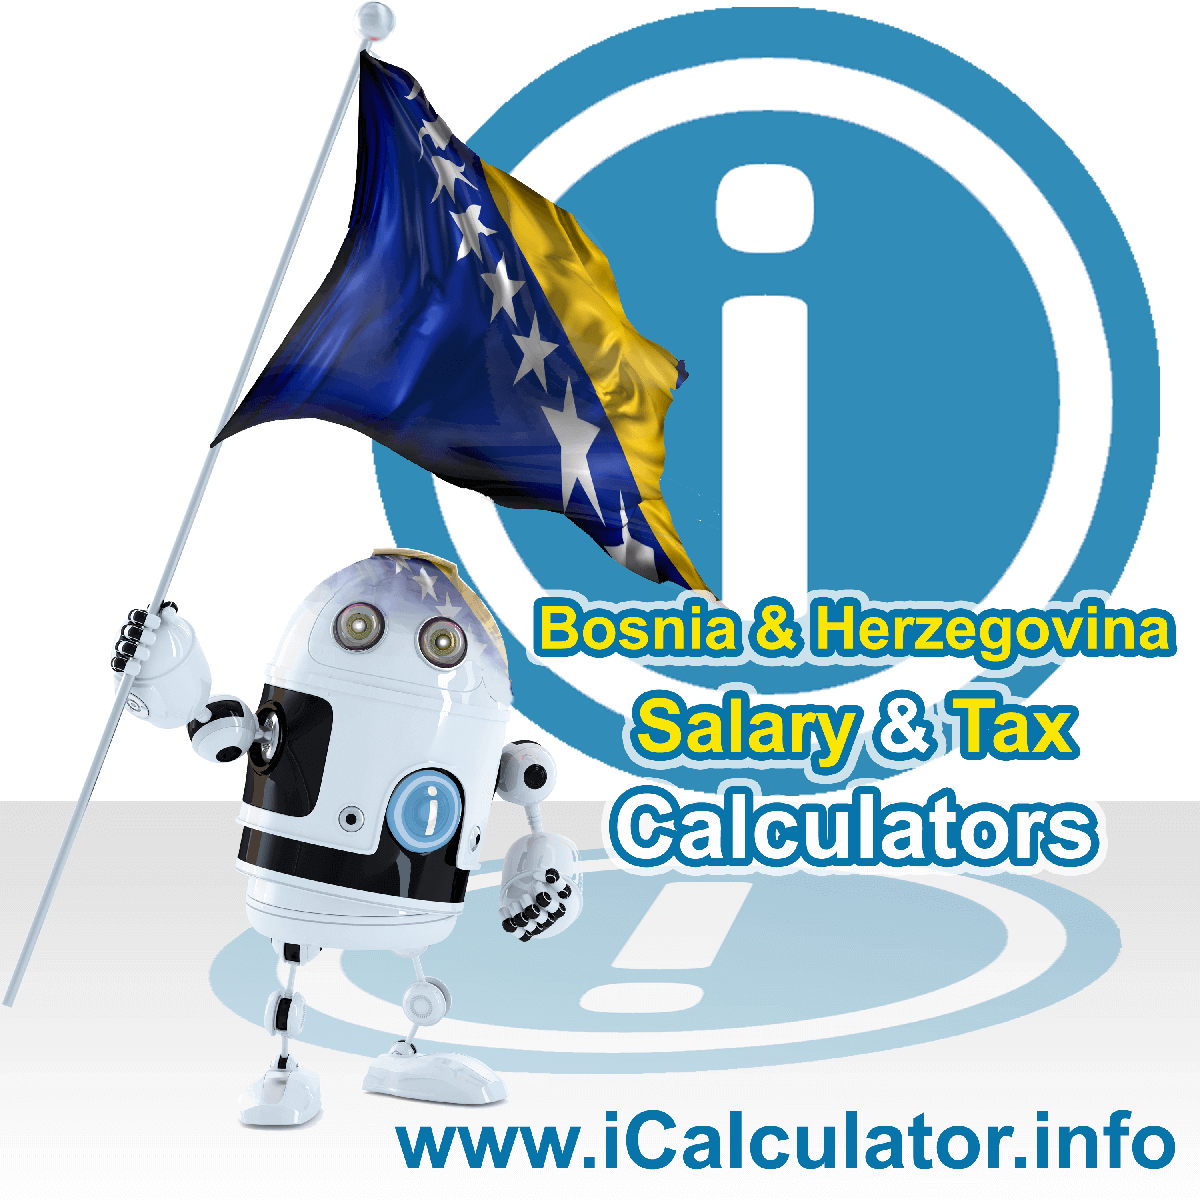 Bosnia And Herzegovina Salary Calculator. This image shows the Bosnia And Herzegovinaese flag and information relating to the tax formula for the Bosnia And Herzegovina Tax Calculator